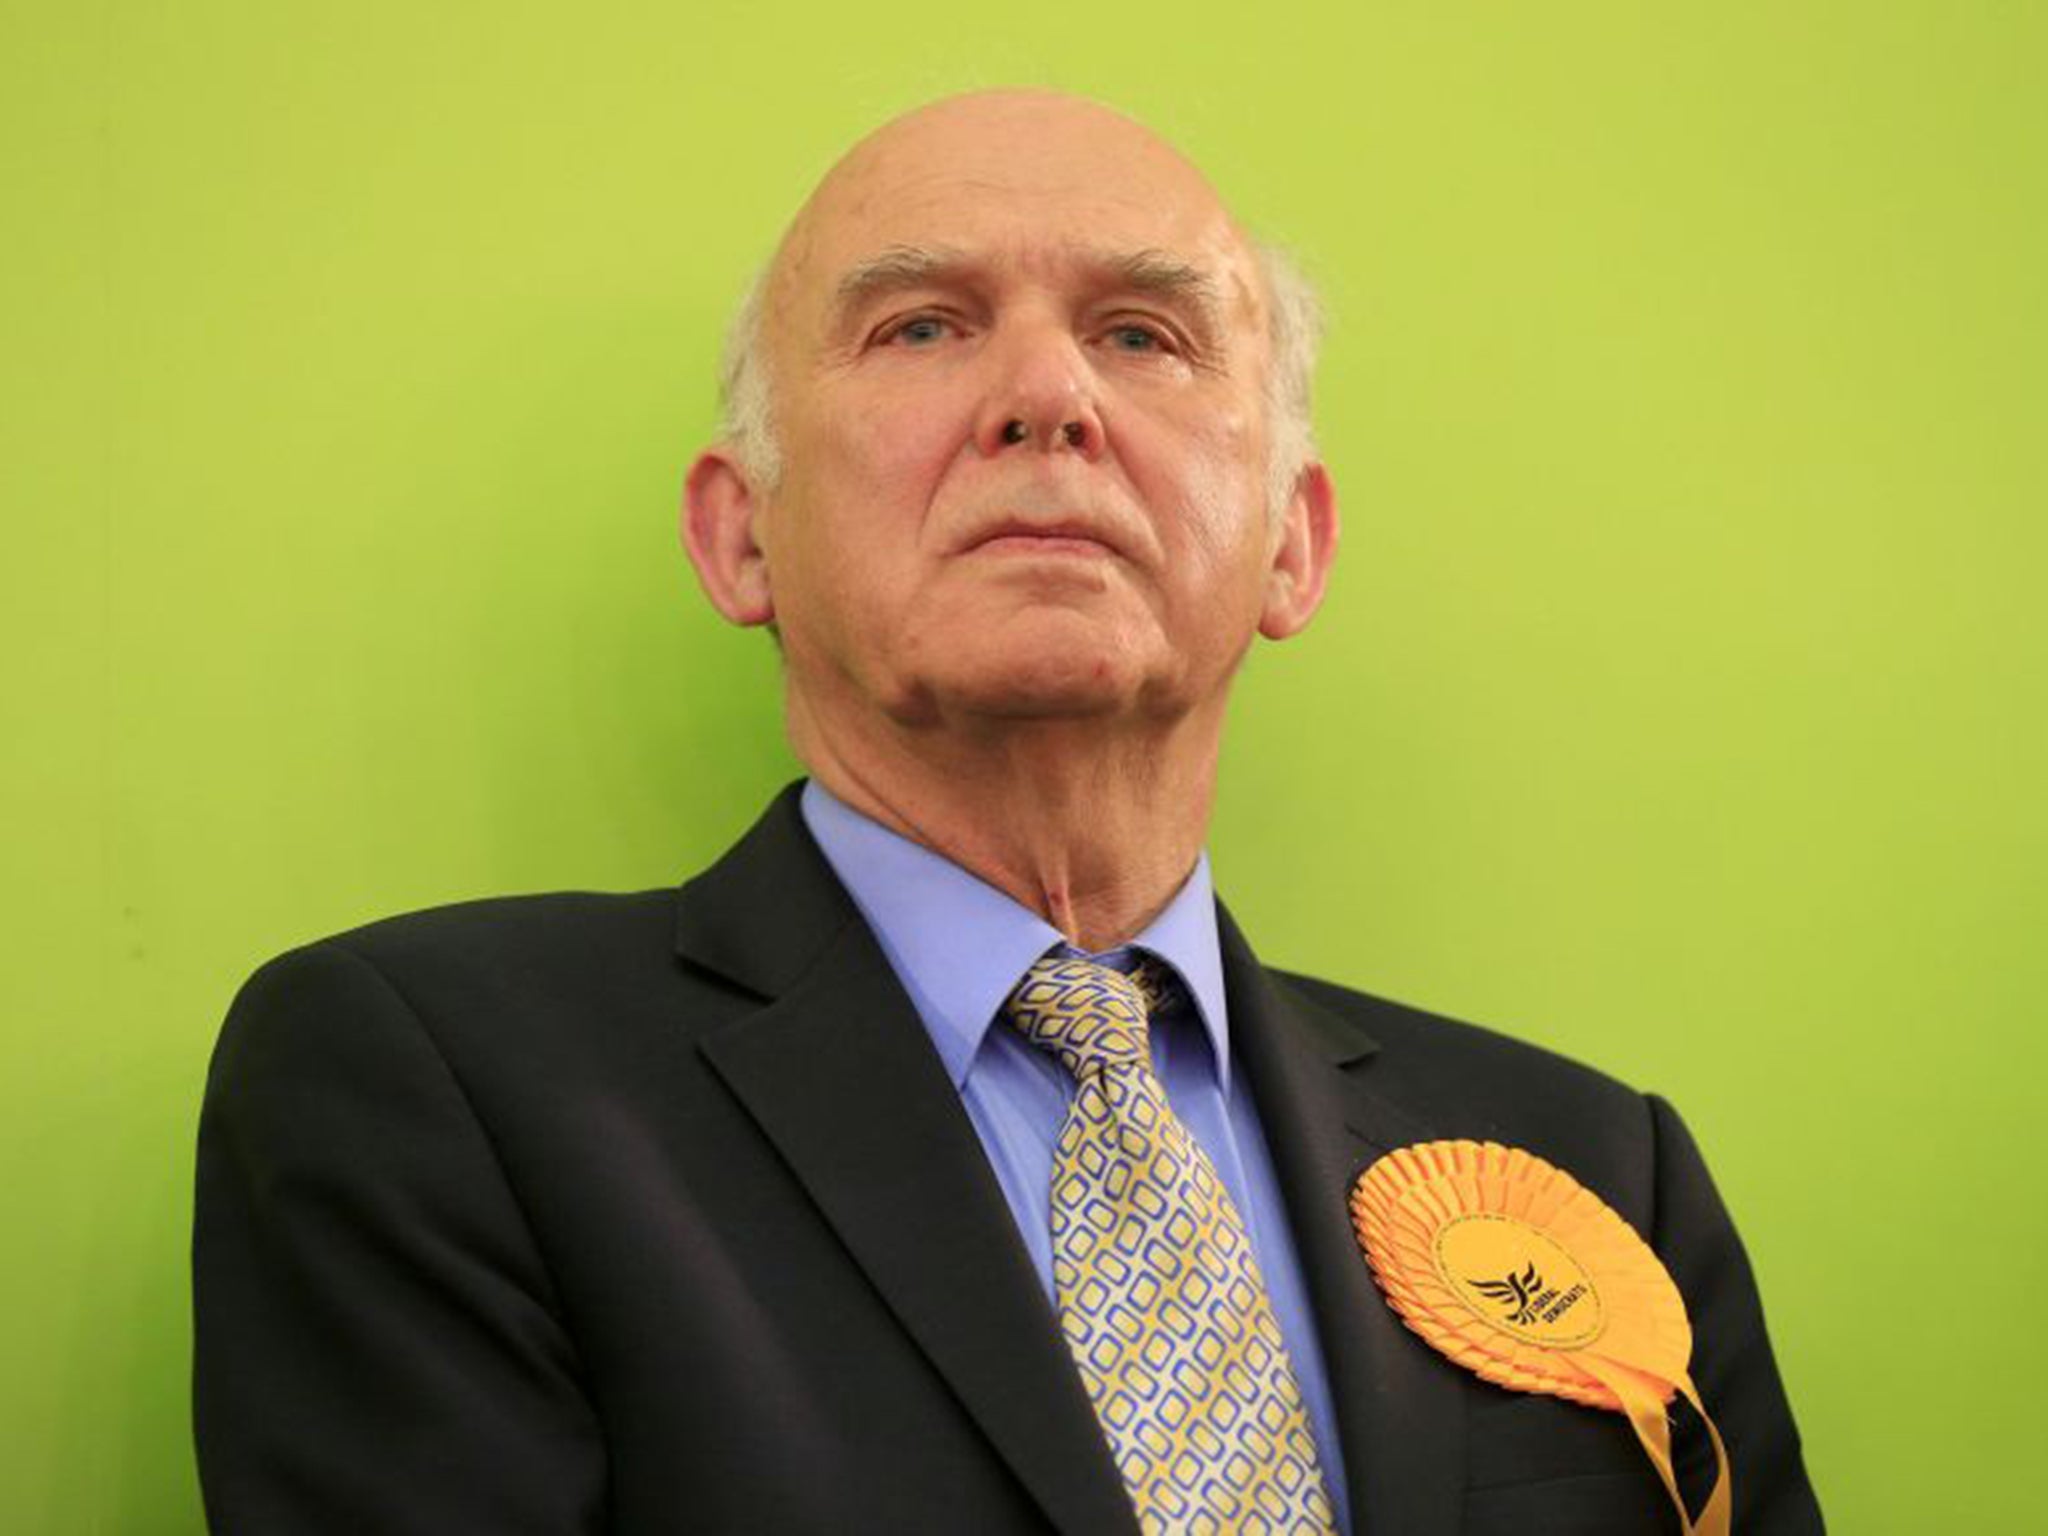 Vince Cable sets out his agenda for a new version of post-Brexit politics